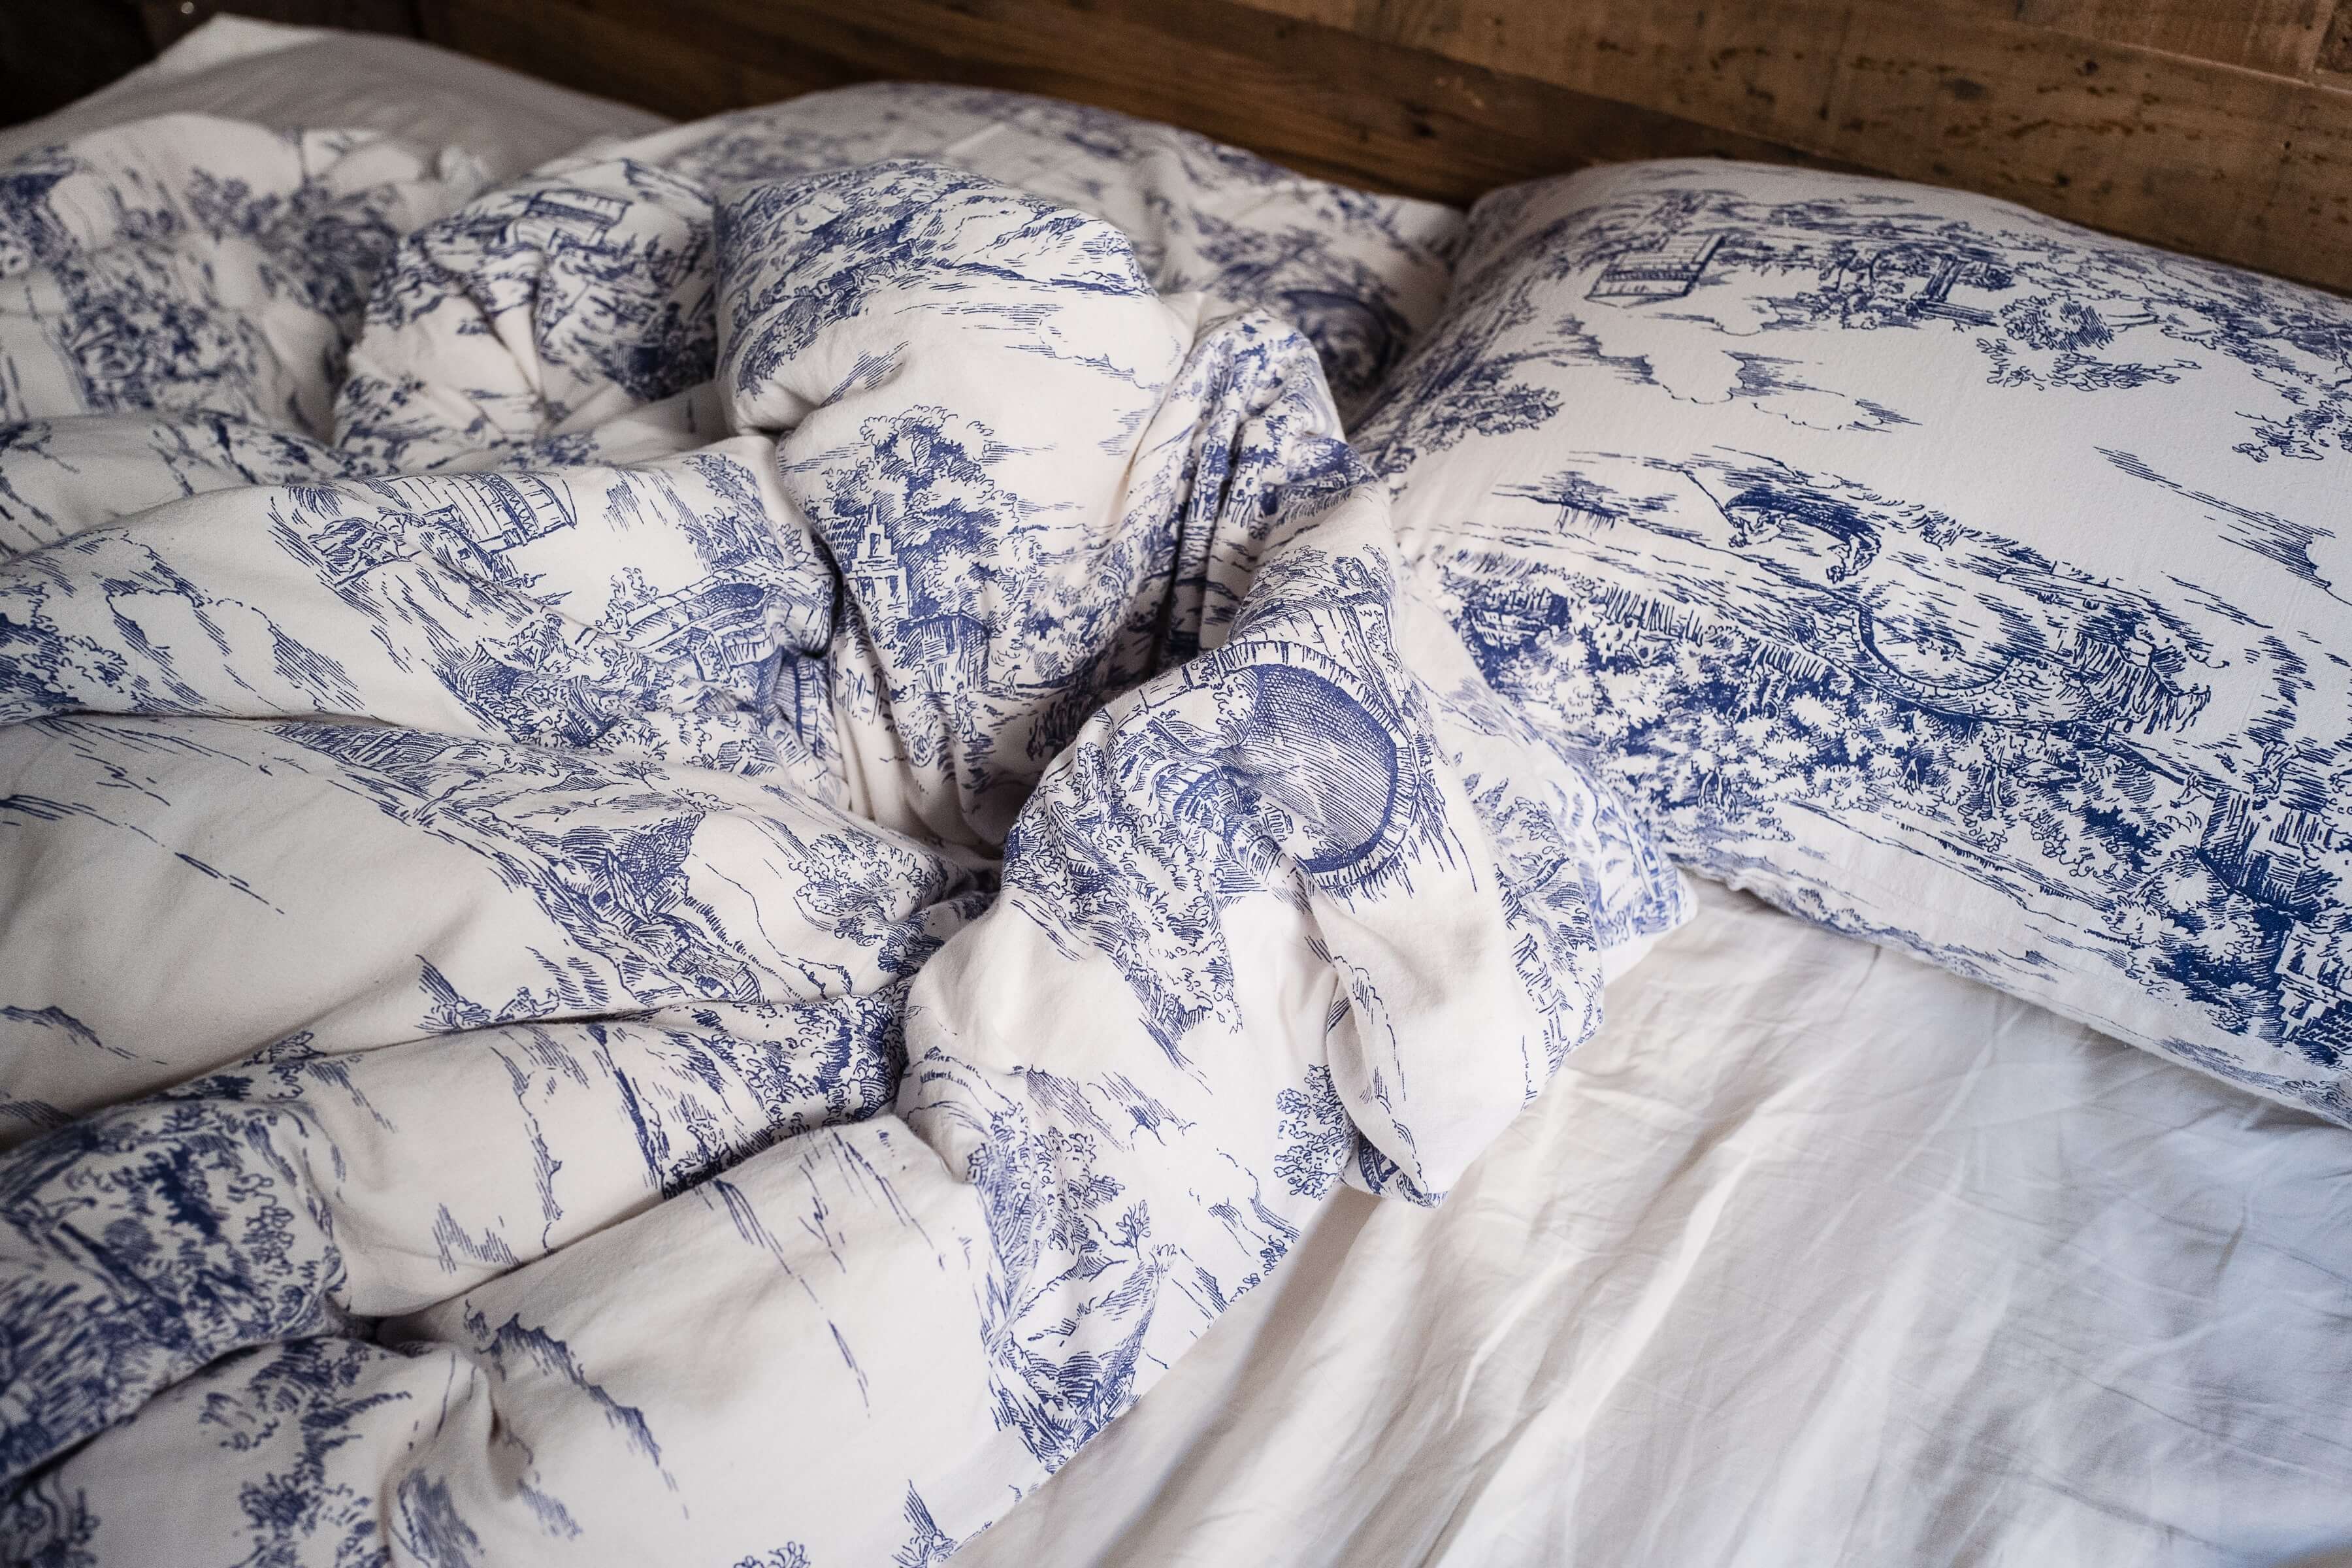 A comforter with toile de Jouy patterns